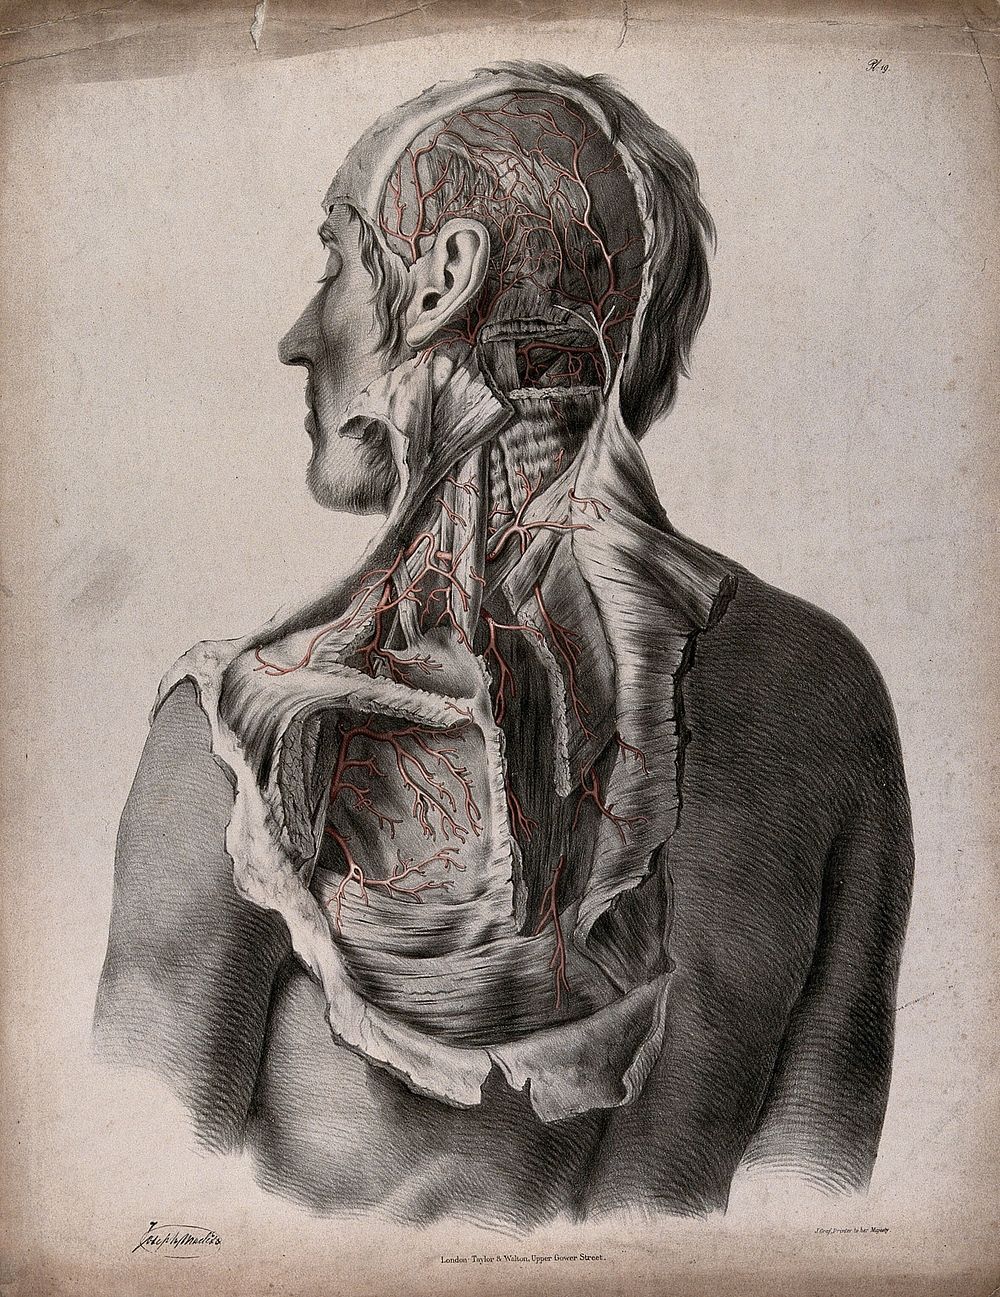 The circulatory system: dissection of the back, shoulder, neck, and back of the head of a man, with blood vessels indicated…